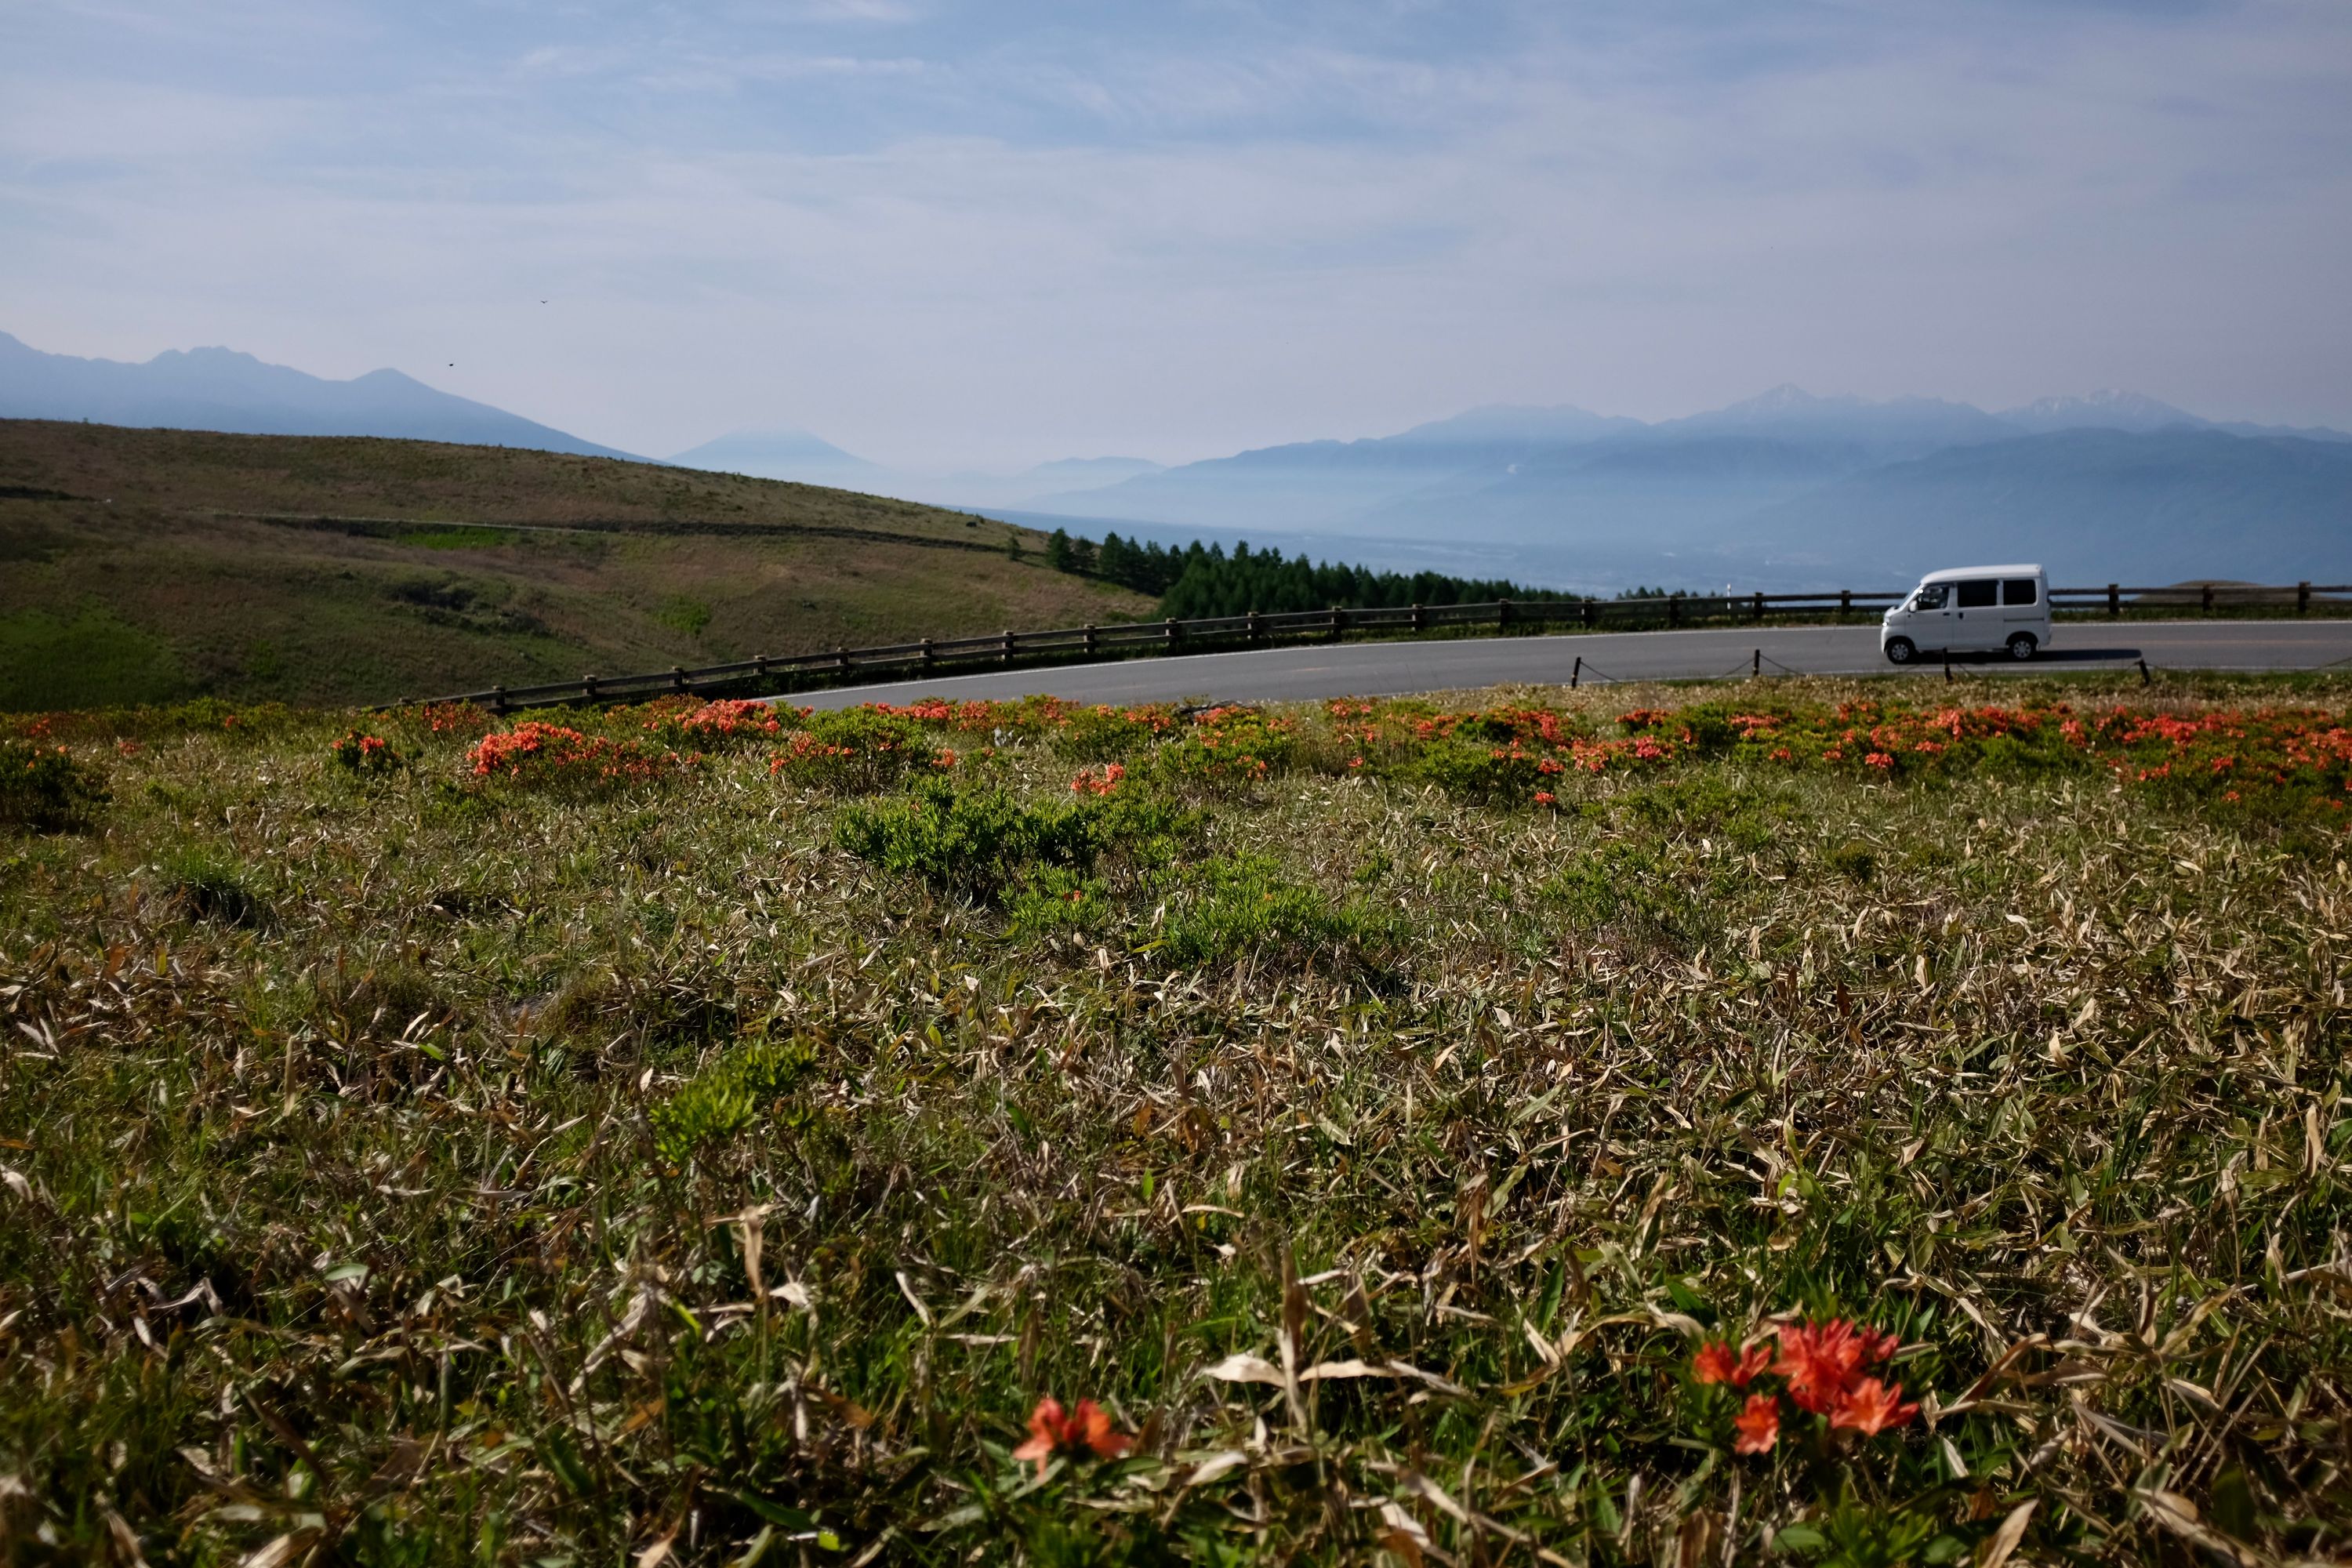 Looking out over an azalea-filled meadow at a mountainous landscape, with Mount Fuji in the center.